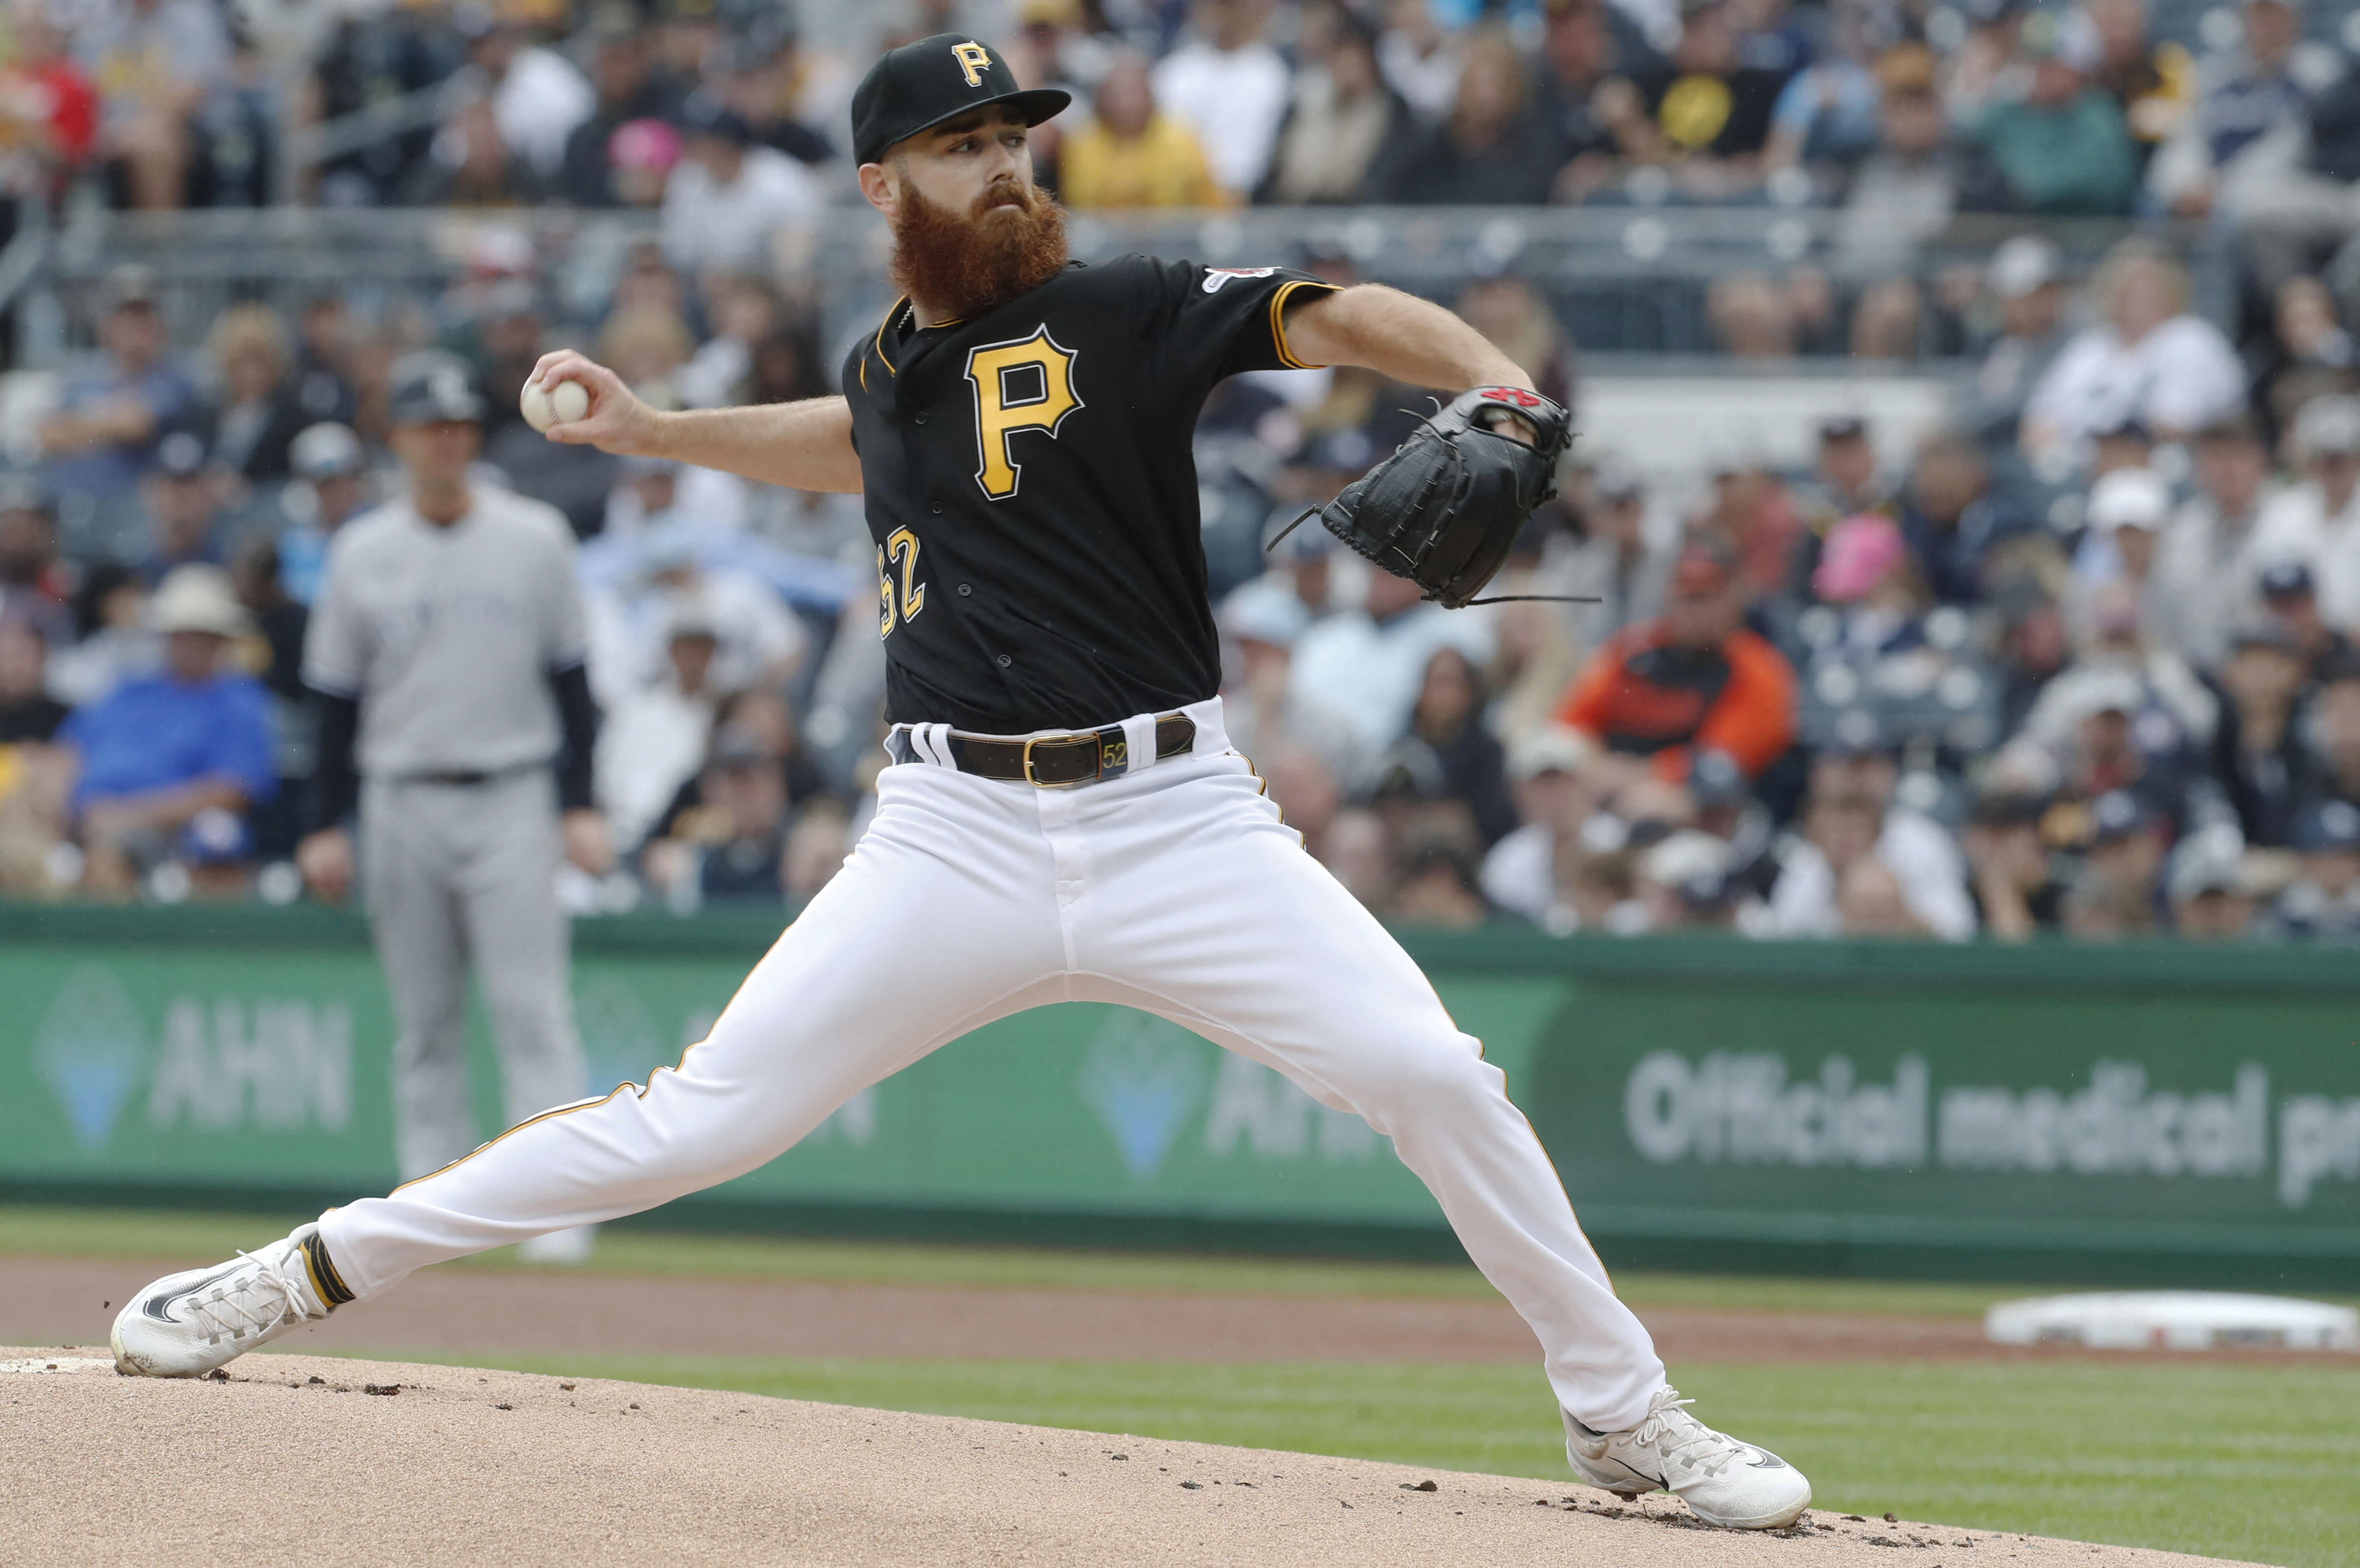 Pirates take advantage of a fortunate bounce to slip by Yankees 3-2 and  avoid a 3-game sweep - The San Diego Union-Tribune